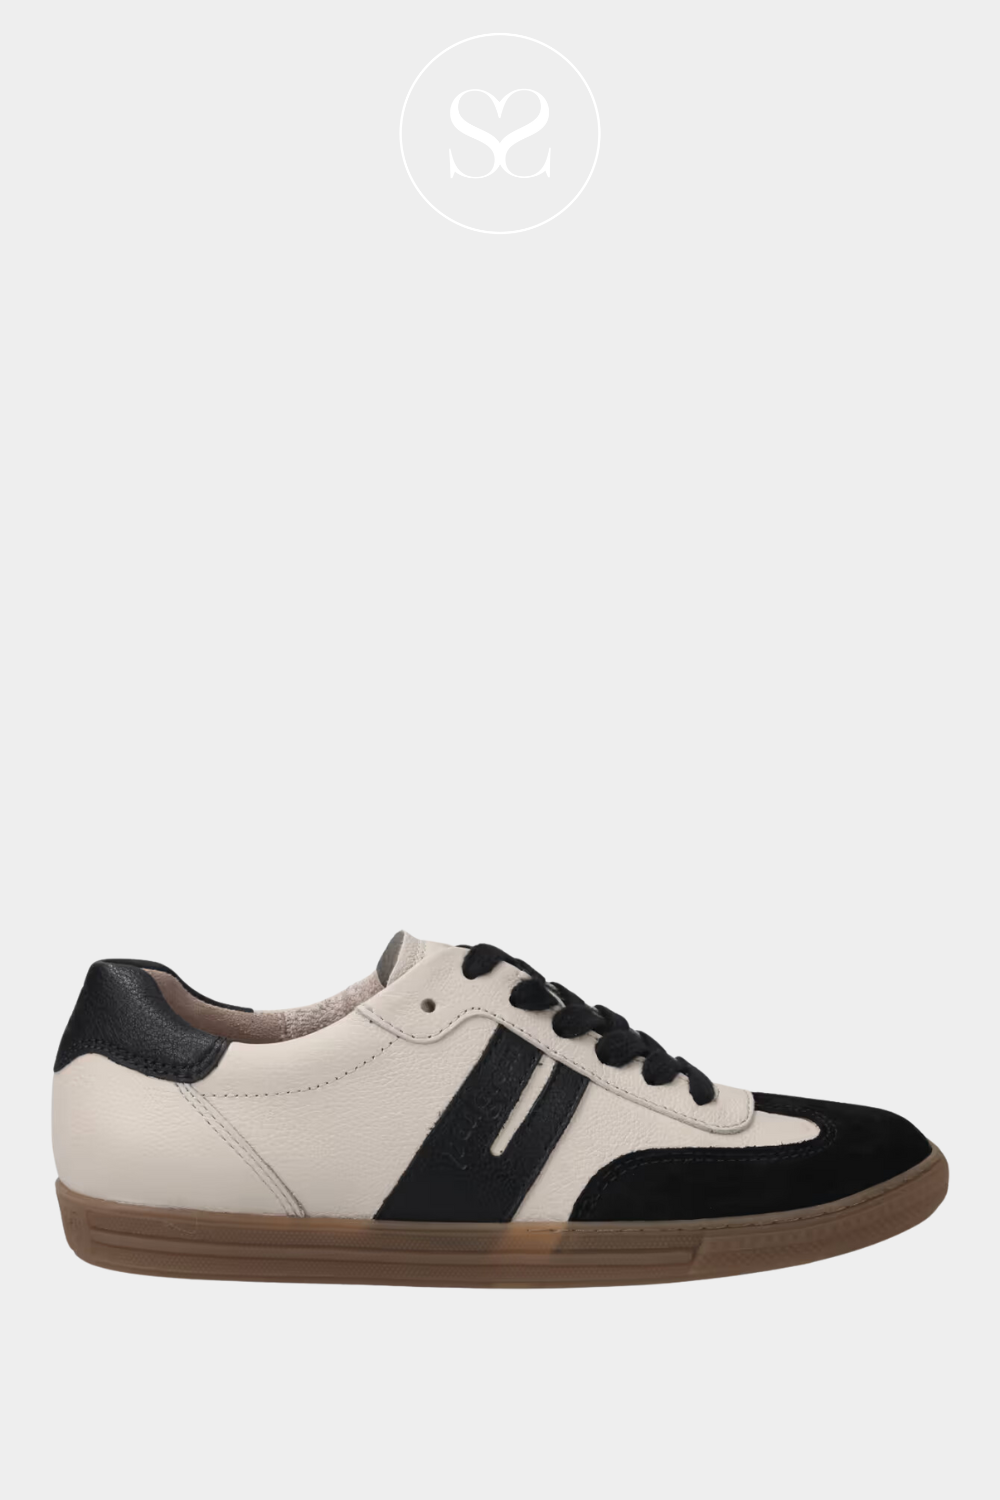 PAUL GREEN 5350 BLACK & BISCUIT LEATHER LOW PROFILE TRAINERS